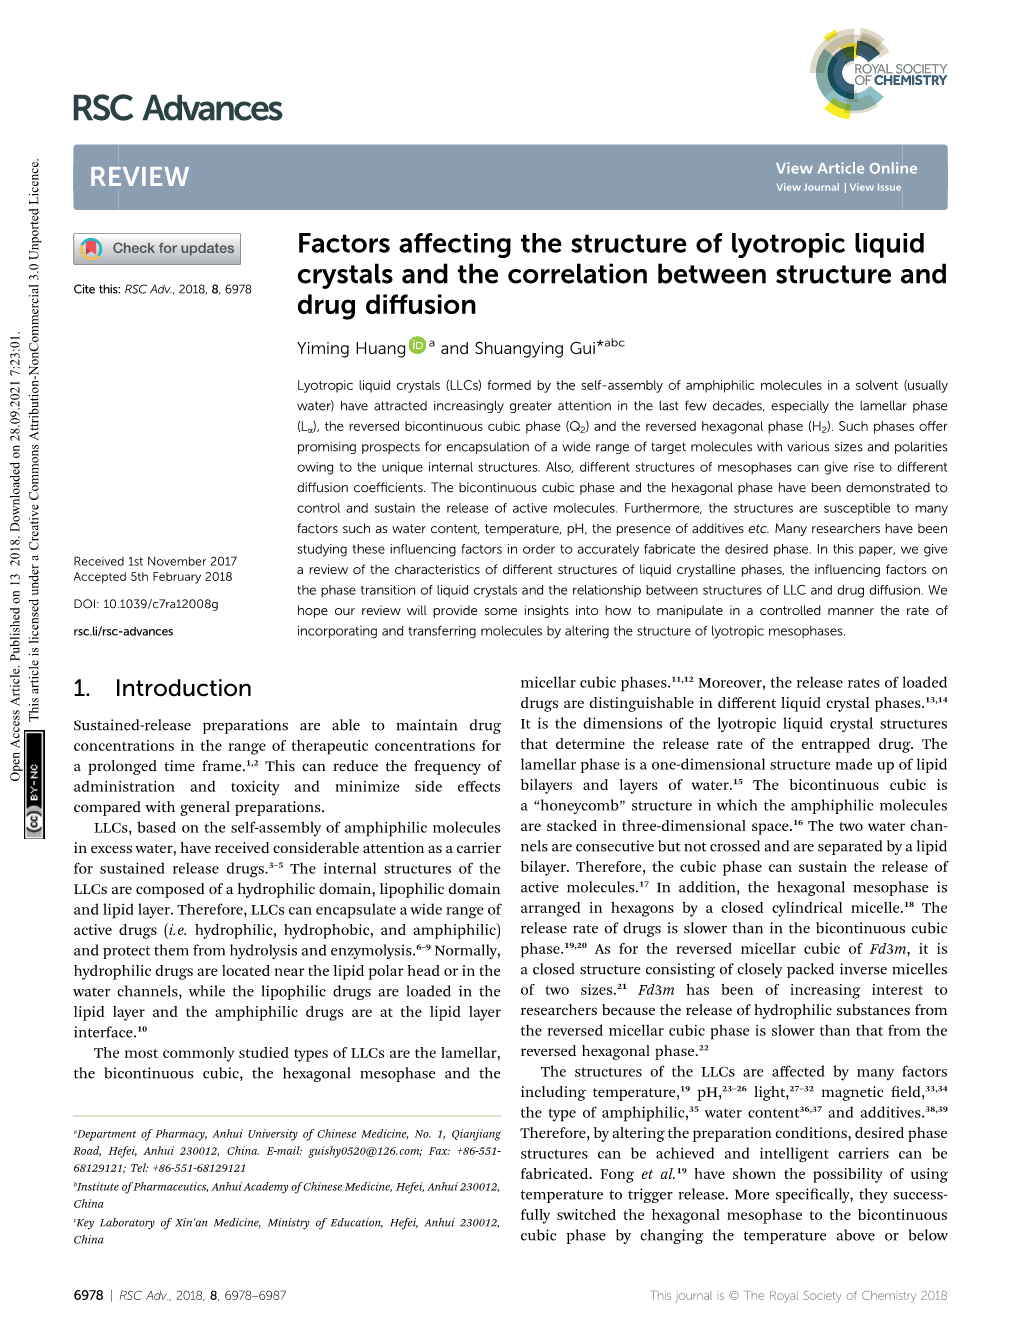 Factors Affecting the Structure of Lyotropic Liquid Crystals and The